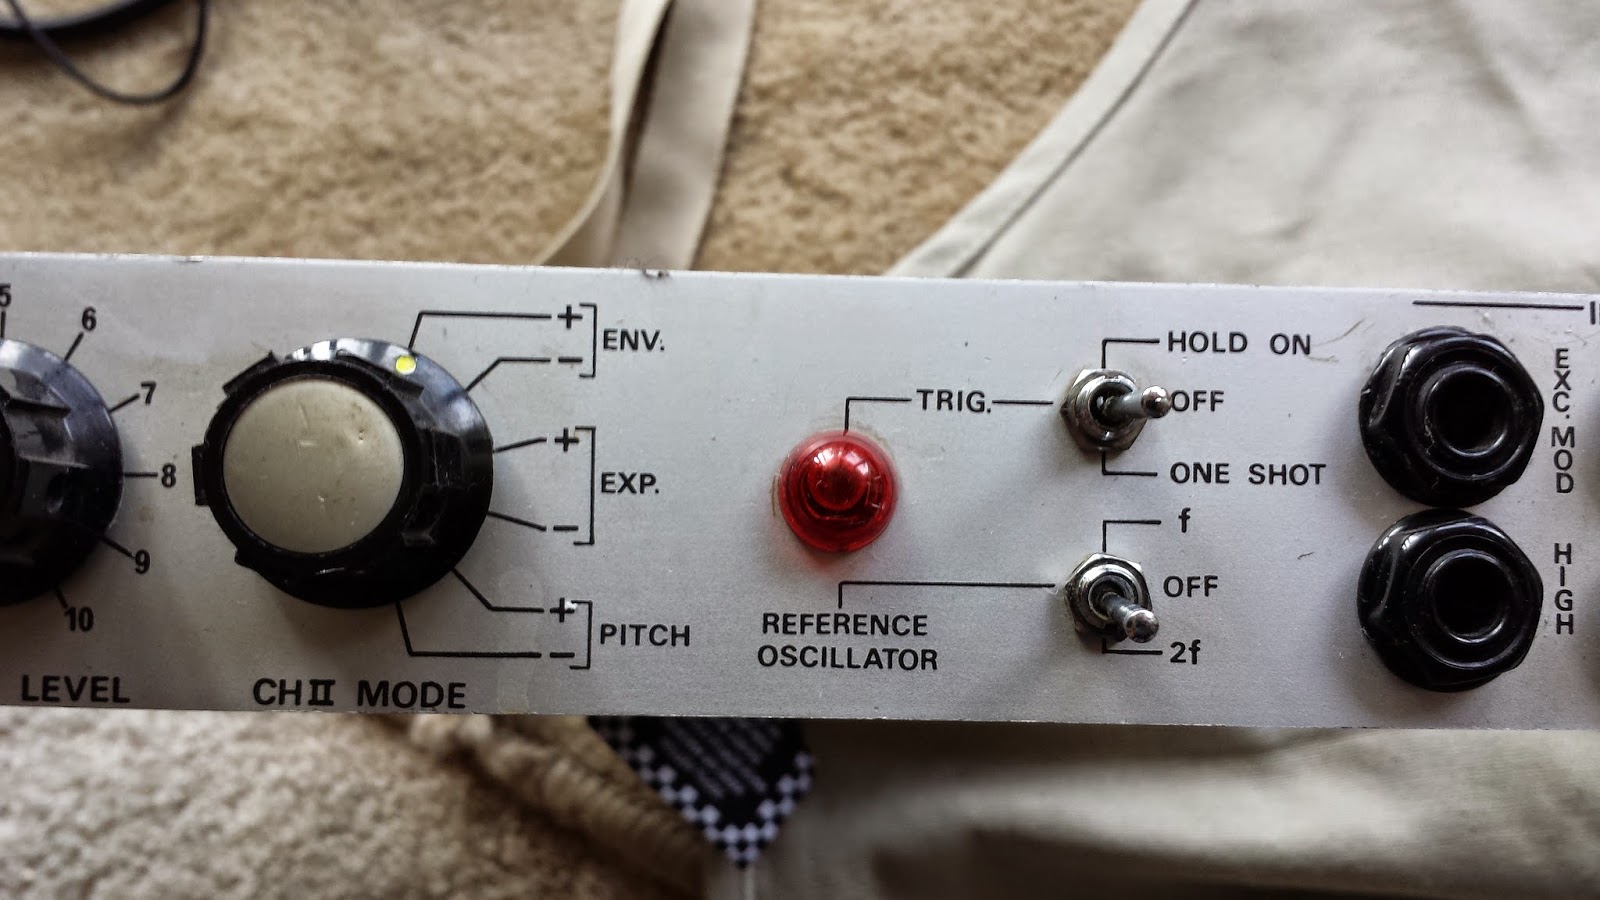 JonDent - Exploring Electronic Music: EMS - Pitch to Voltage converter